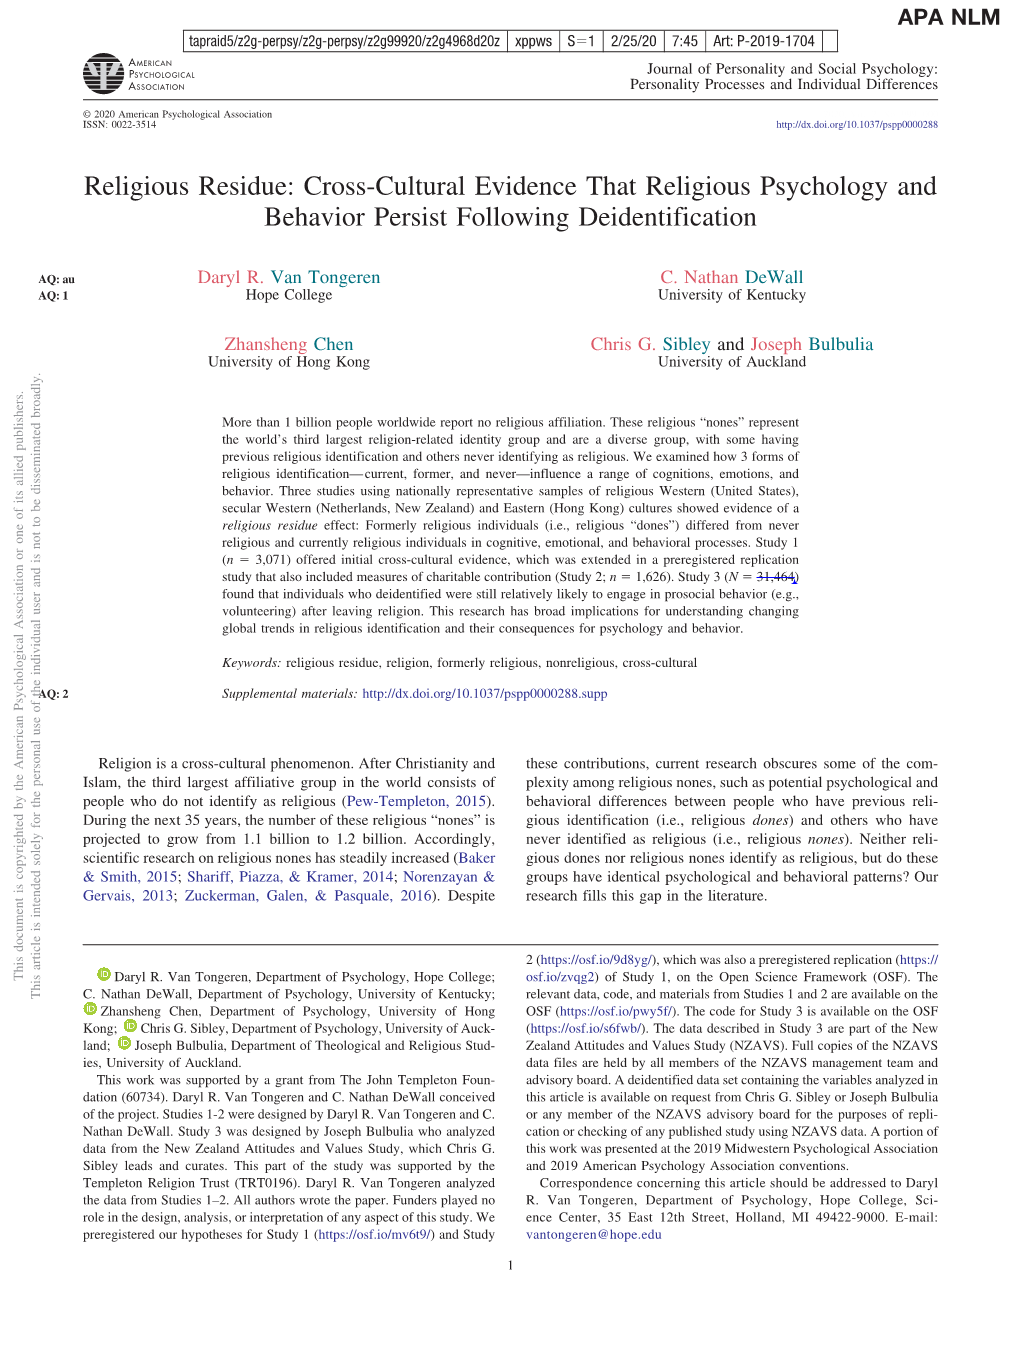 Religious Residue: Cross-Cultural Evidence That Religious Psychology and Behavior Persist Following Deidentification